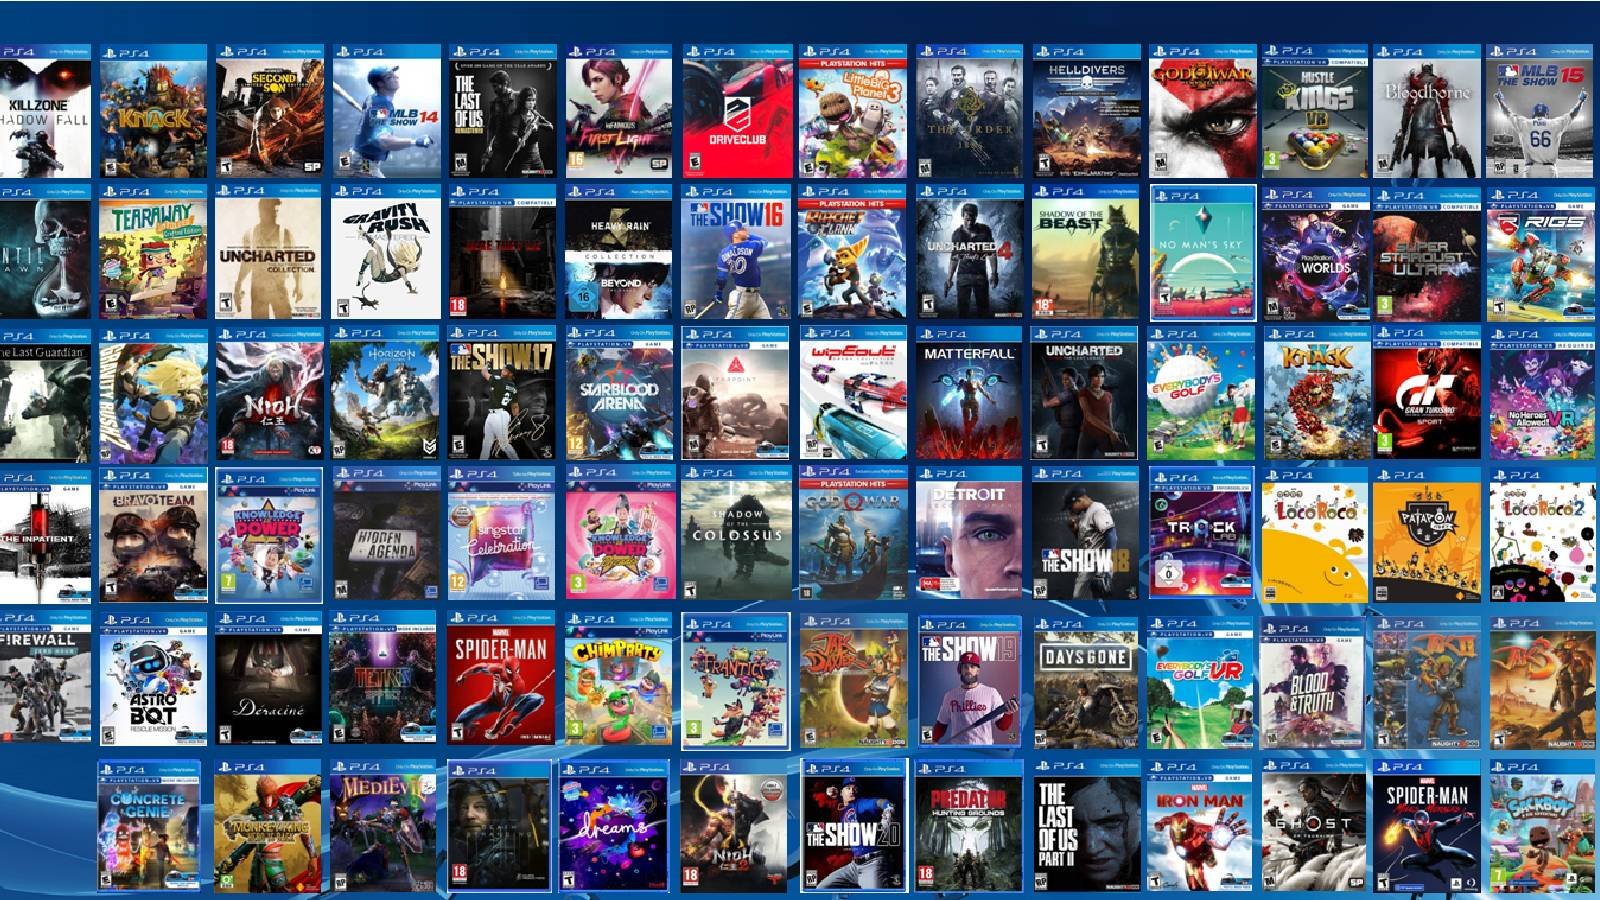 Sony expects to stop creating PS4 games by 2025, as per the latest